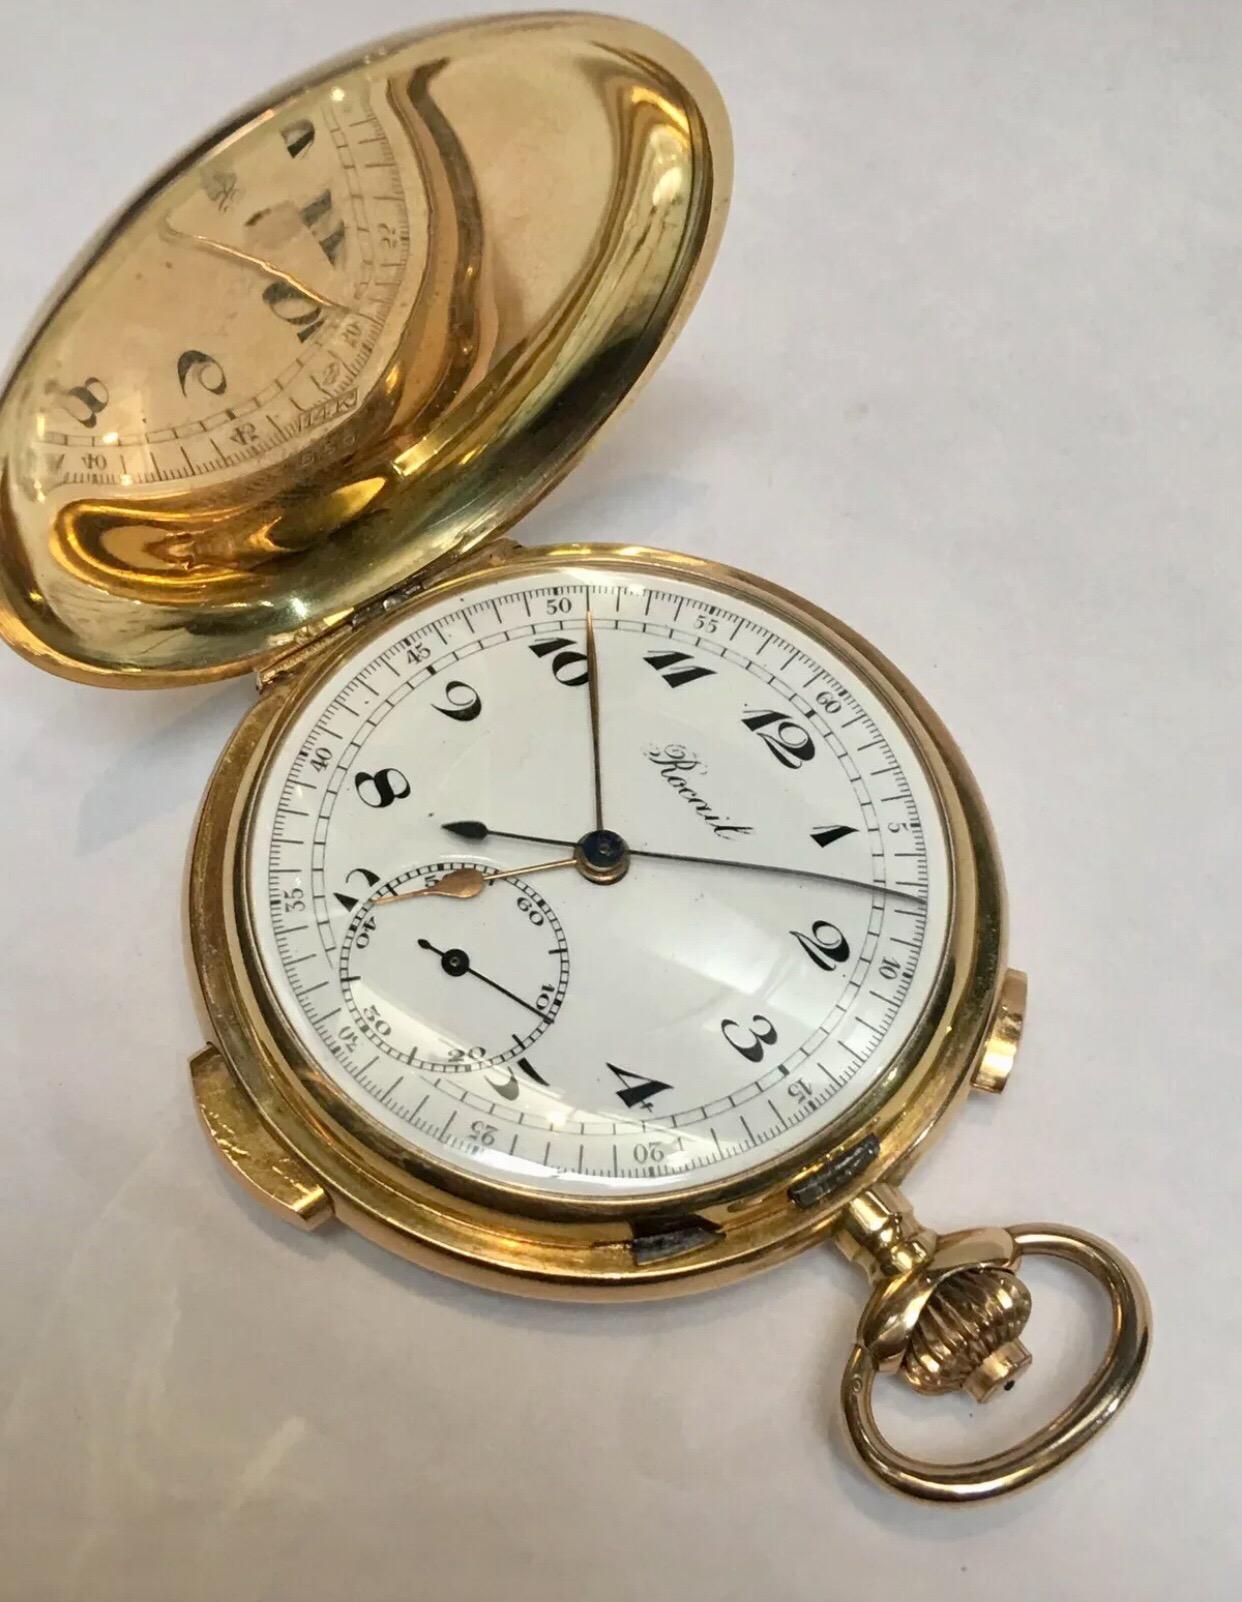 A 14ct gold Rocail full hunter Minute Repeater chronograph pocket watch, white enamelled dial, Arabic numerals, subsidiary seconds dial, timer sweep hand, top winding Swiss jewelled movement, the inner cover stamped with Swiss quality marks, 14